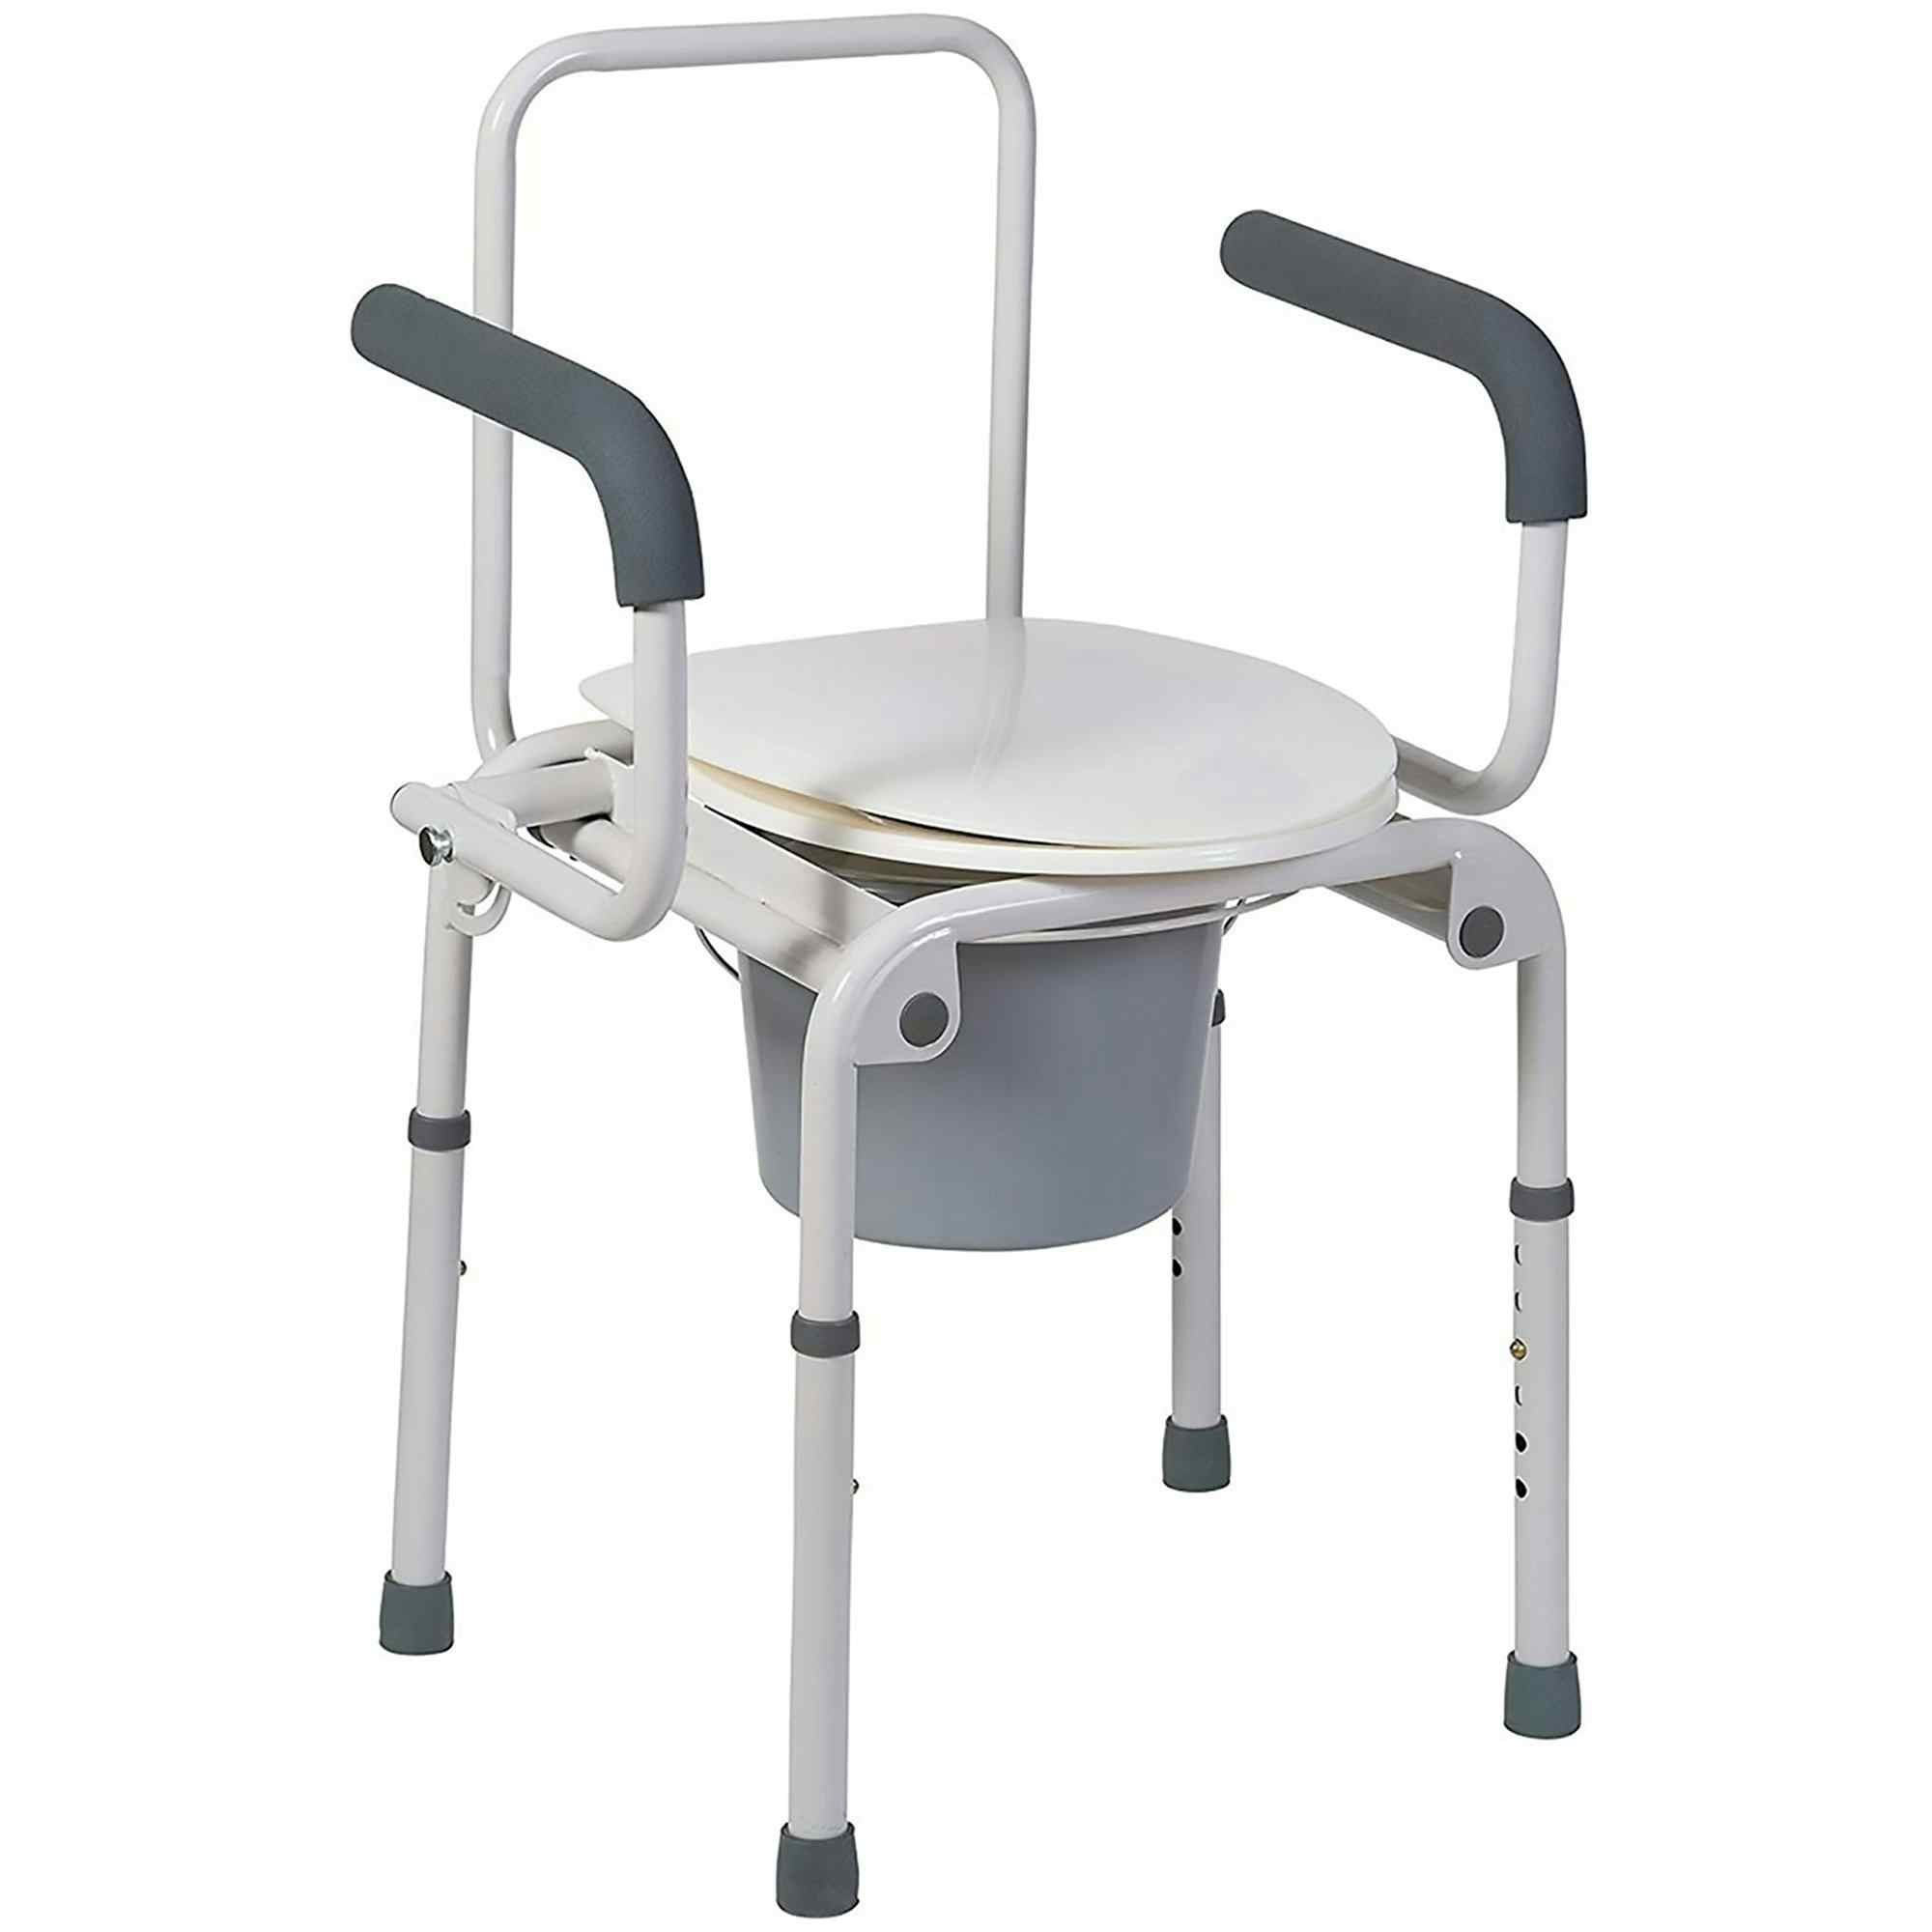 Mabis Drop-Arm Steel Commode, 520-1213-1900, 1 Each